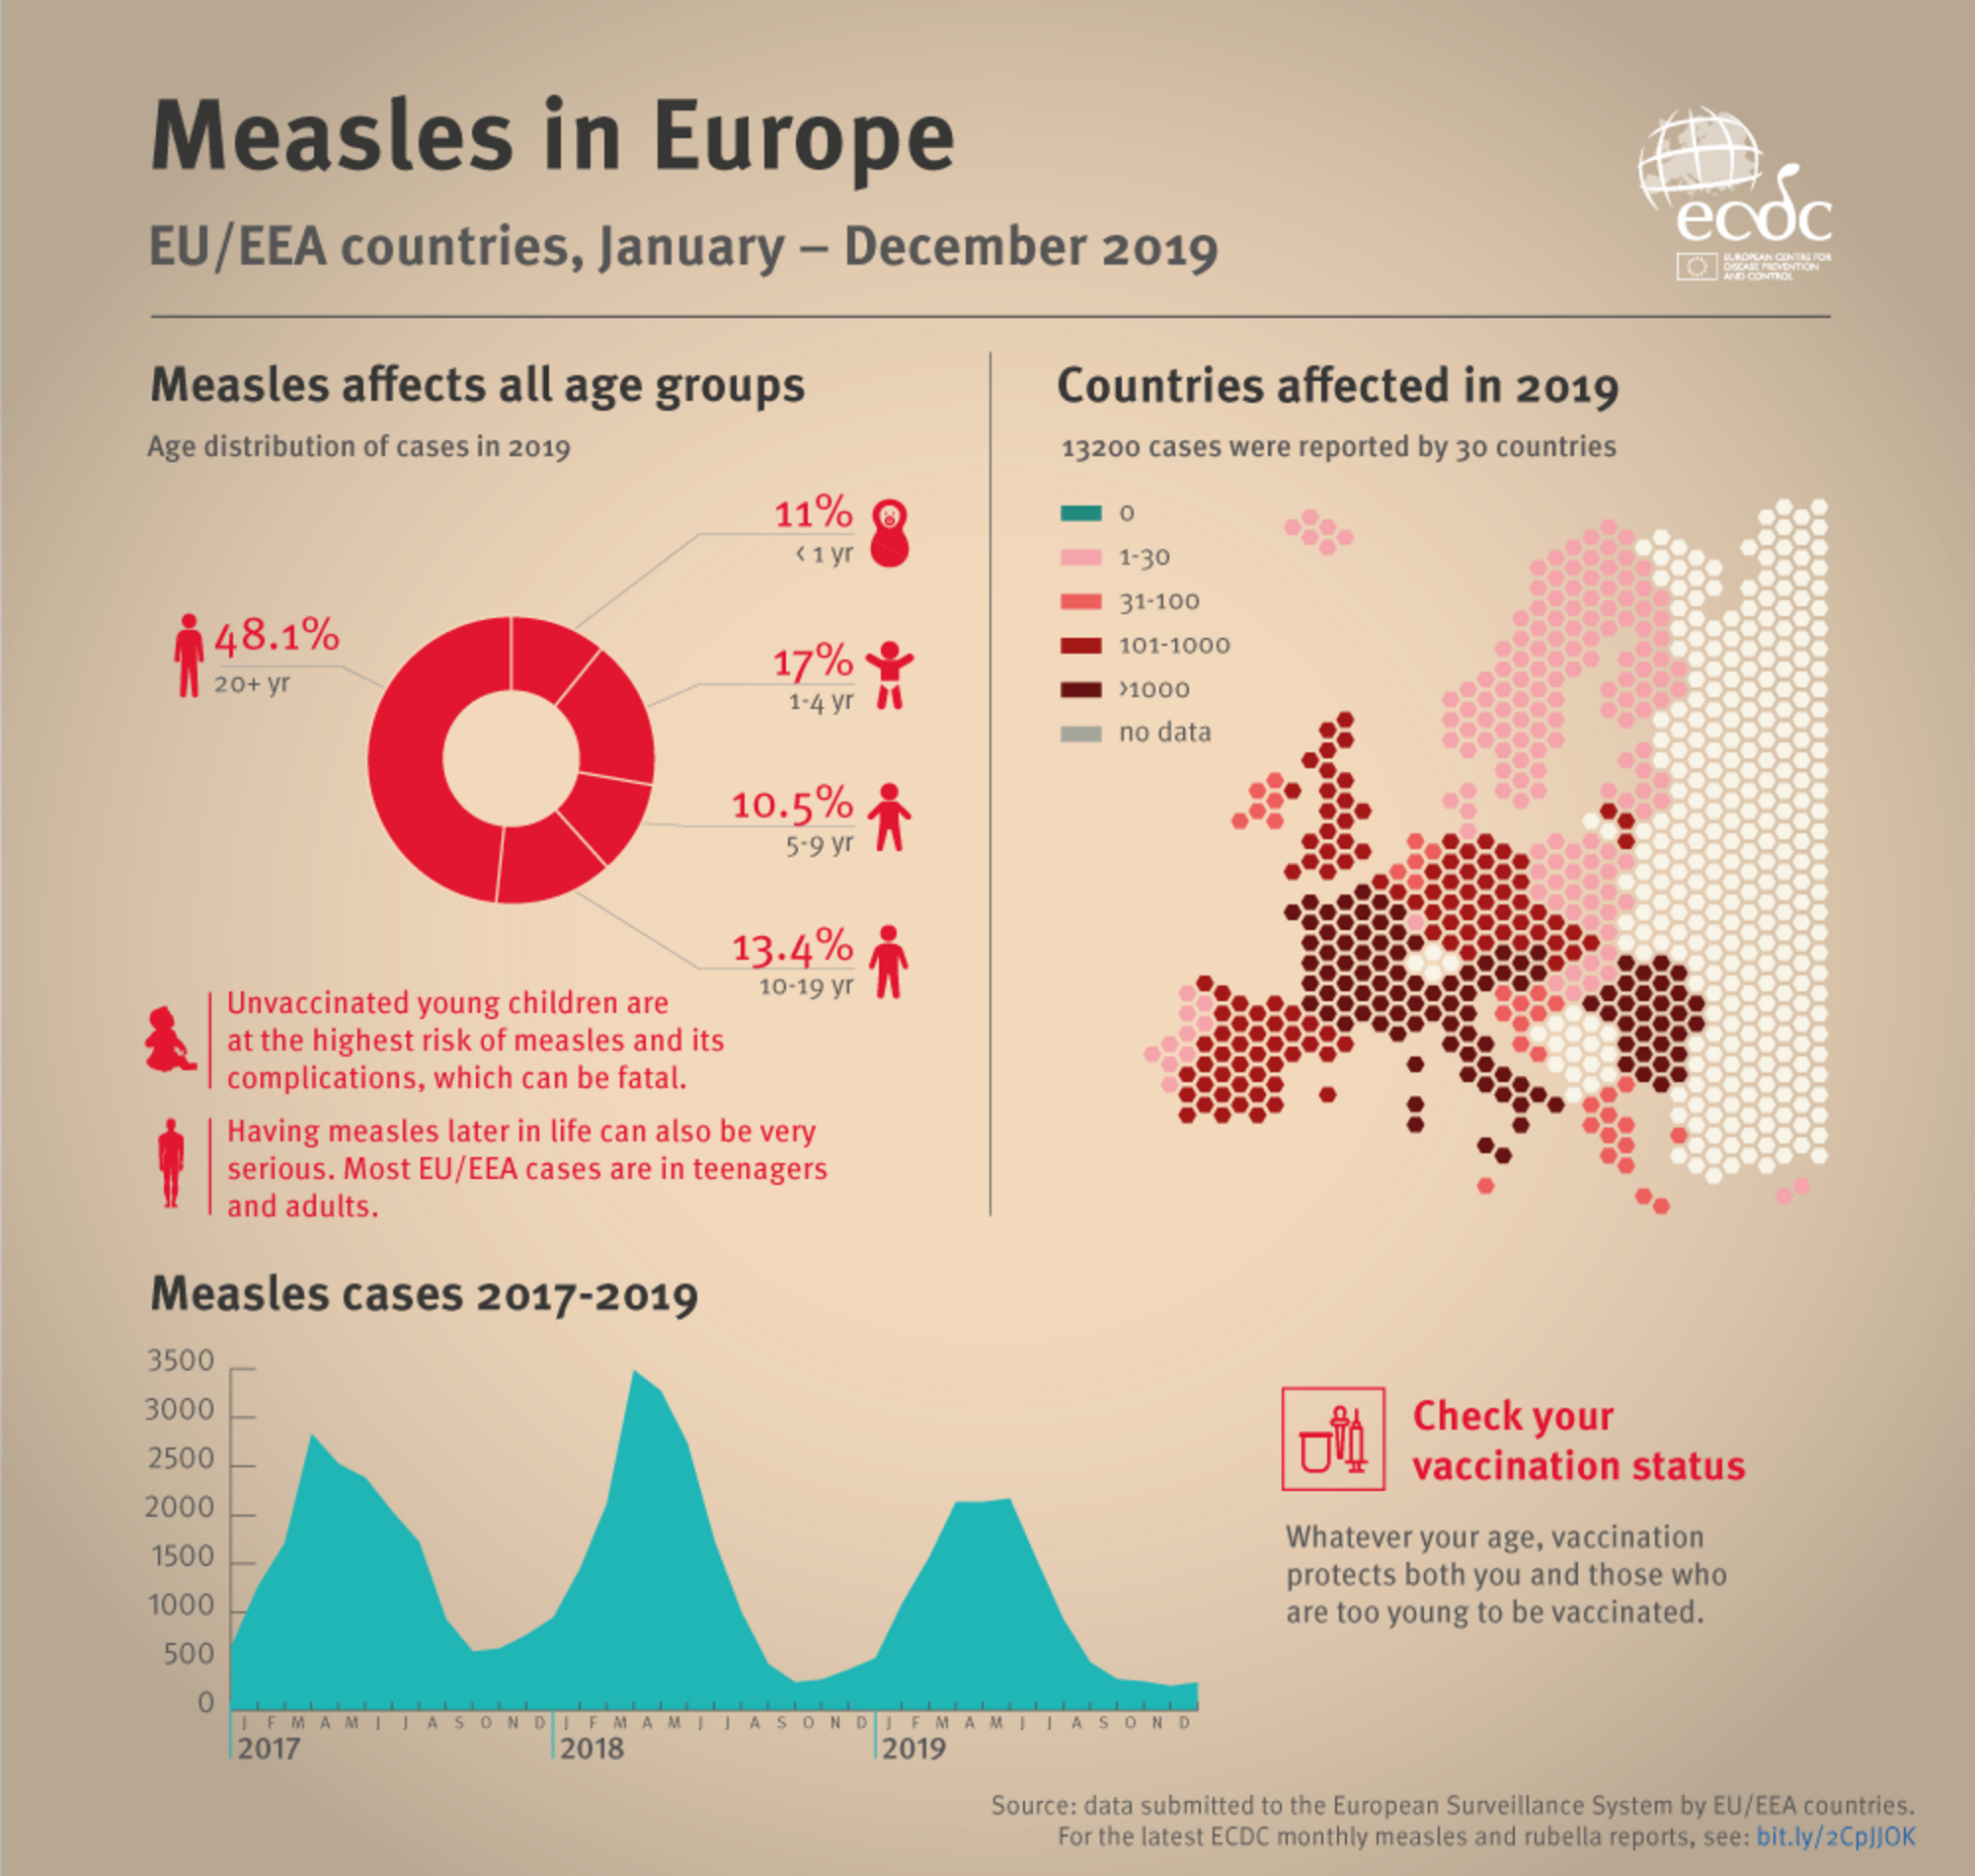 Infographic Measles in Europe, April 2020